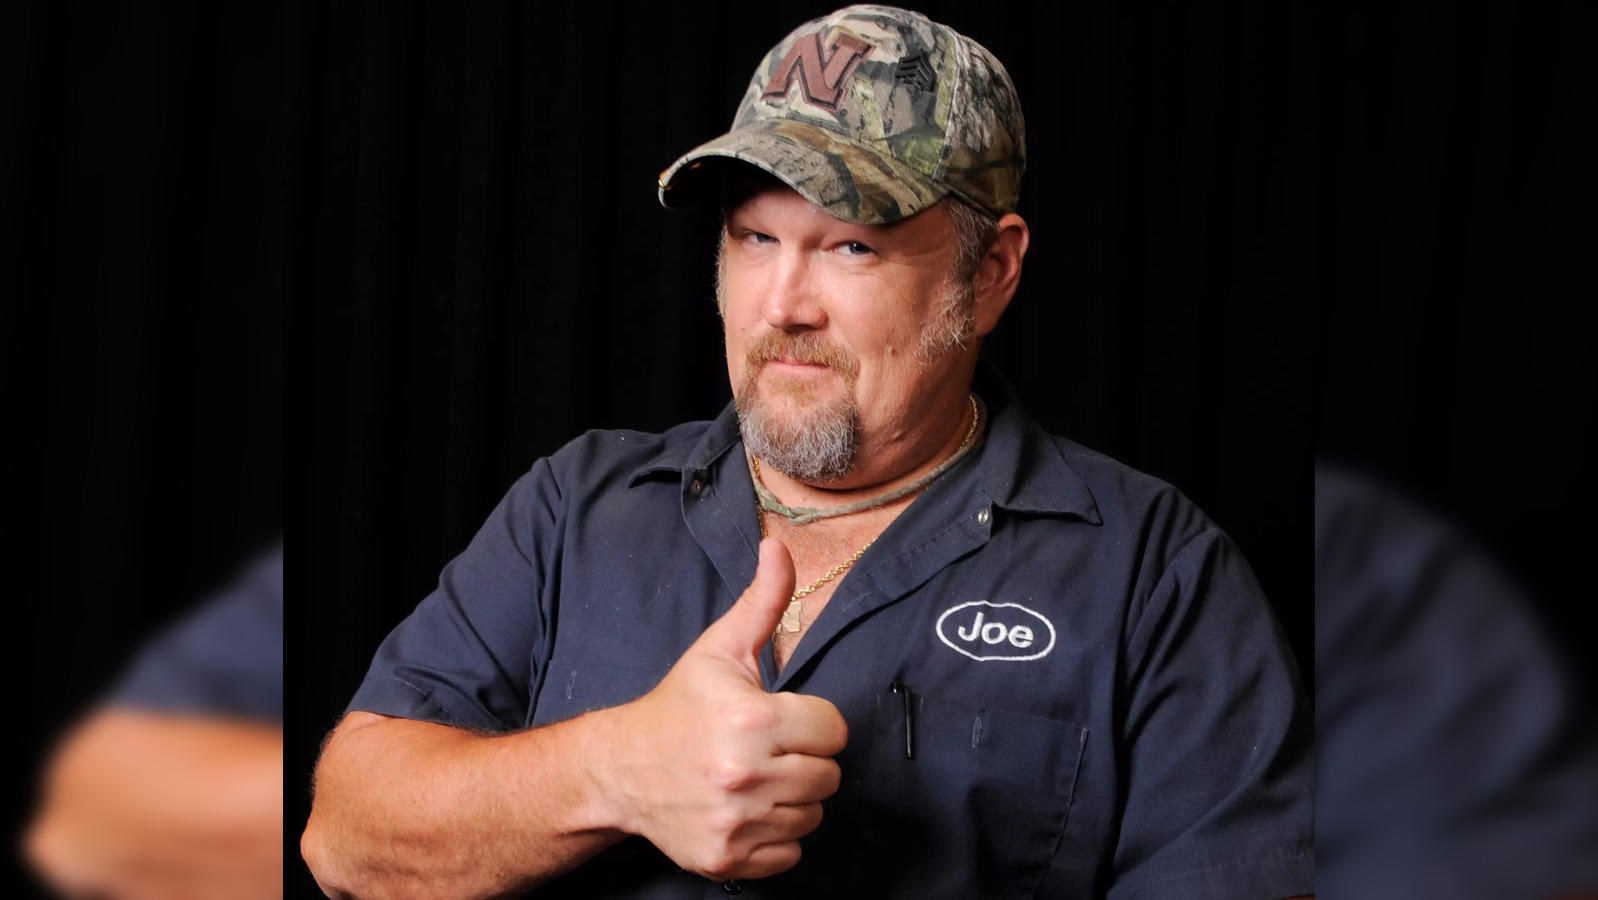 Larry the Cable Guy: Why is it trending? Know about the hoax involving  popular US stand-up comedian - The Economic Times